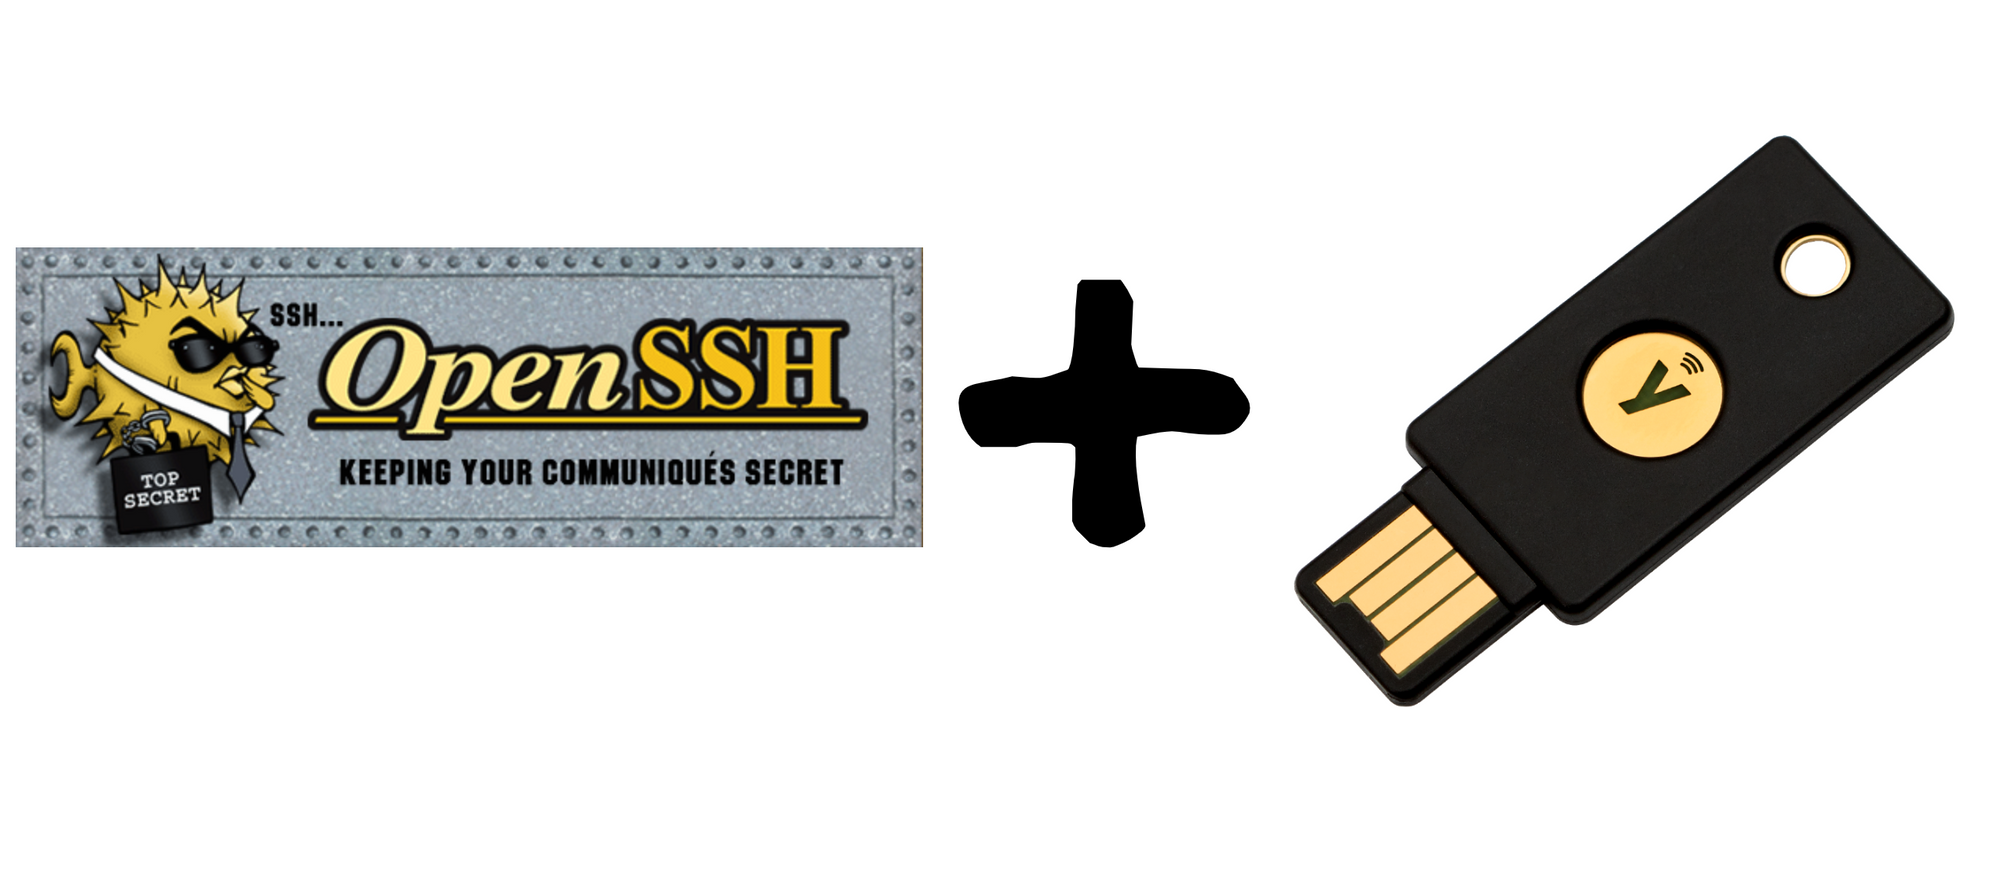 Picture of the OpenSSH logo and a Yubikey